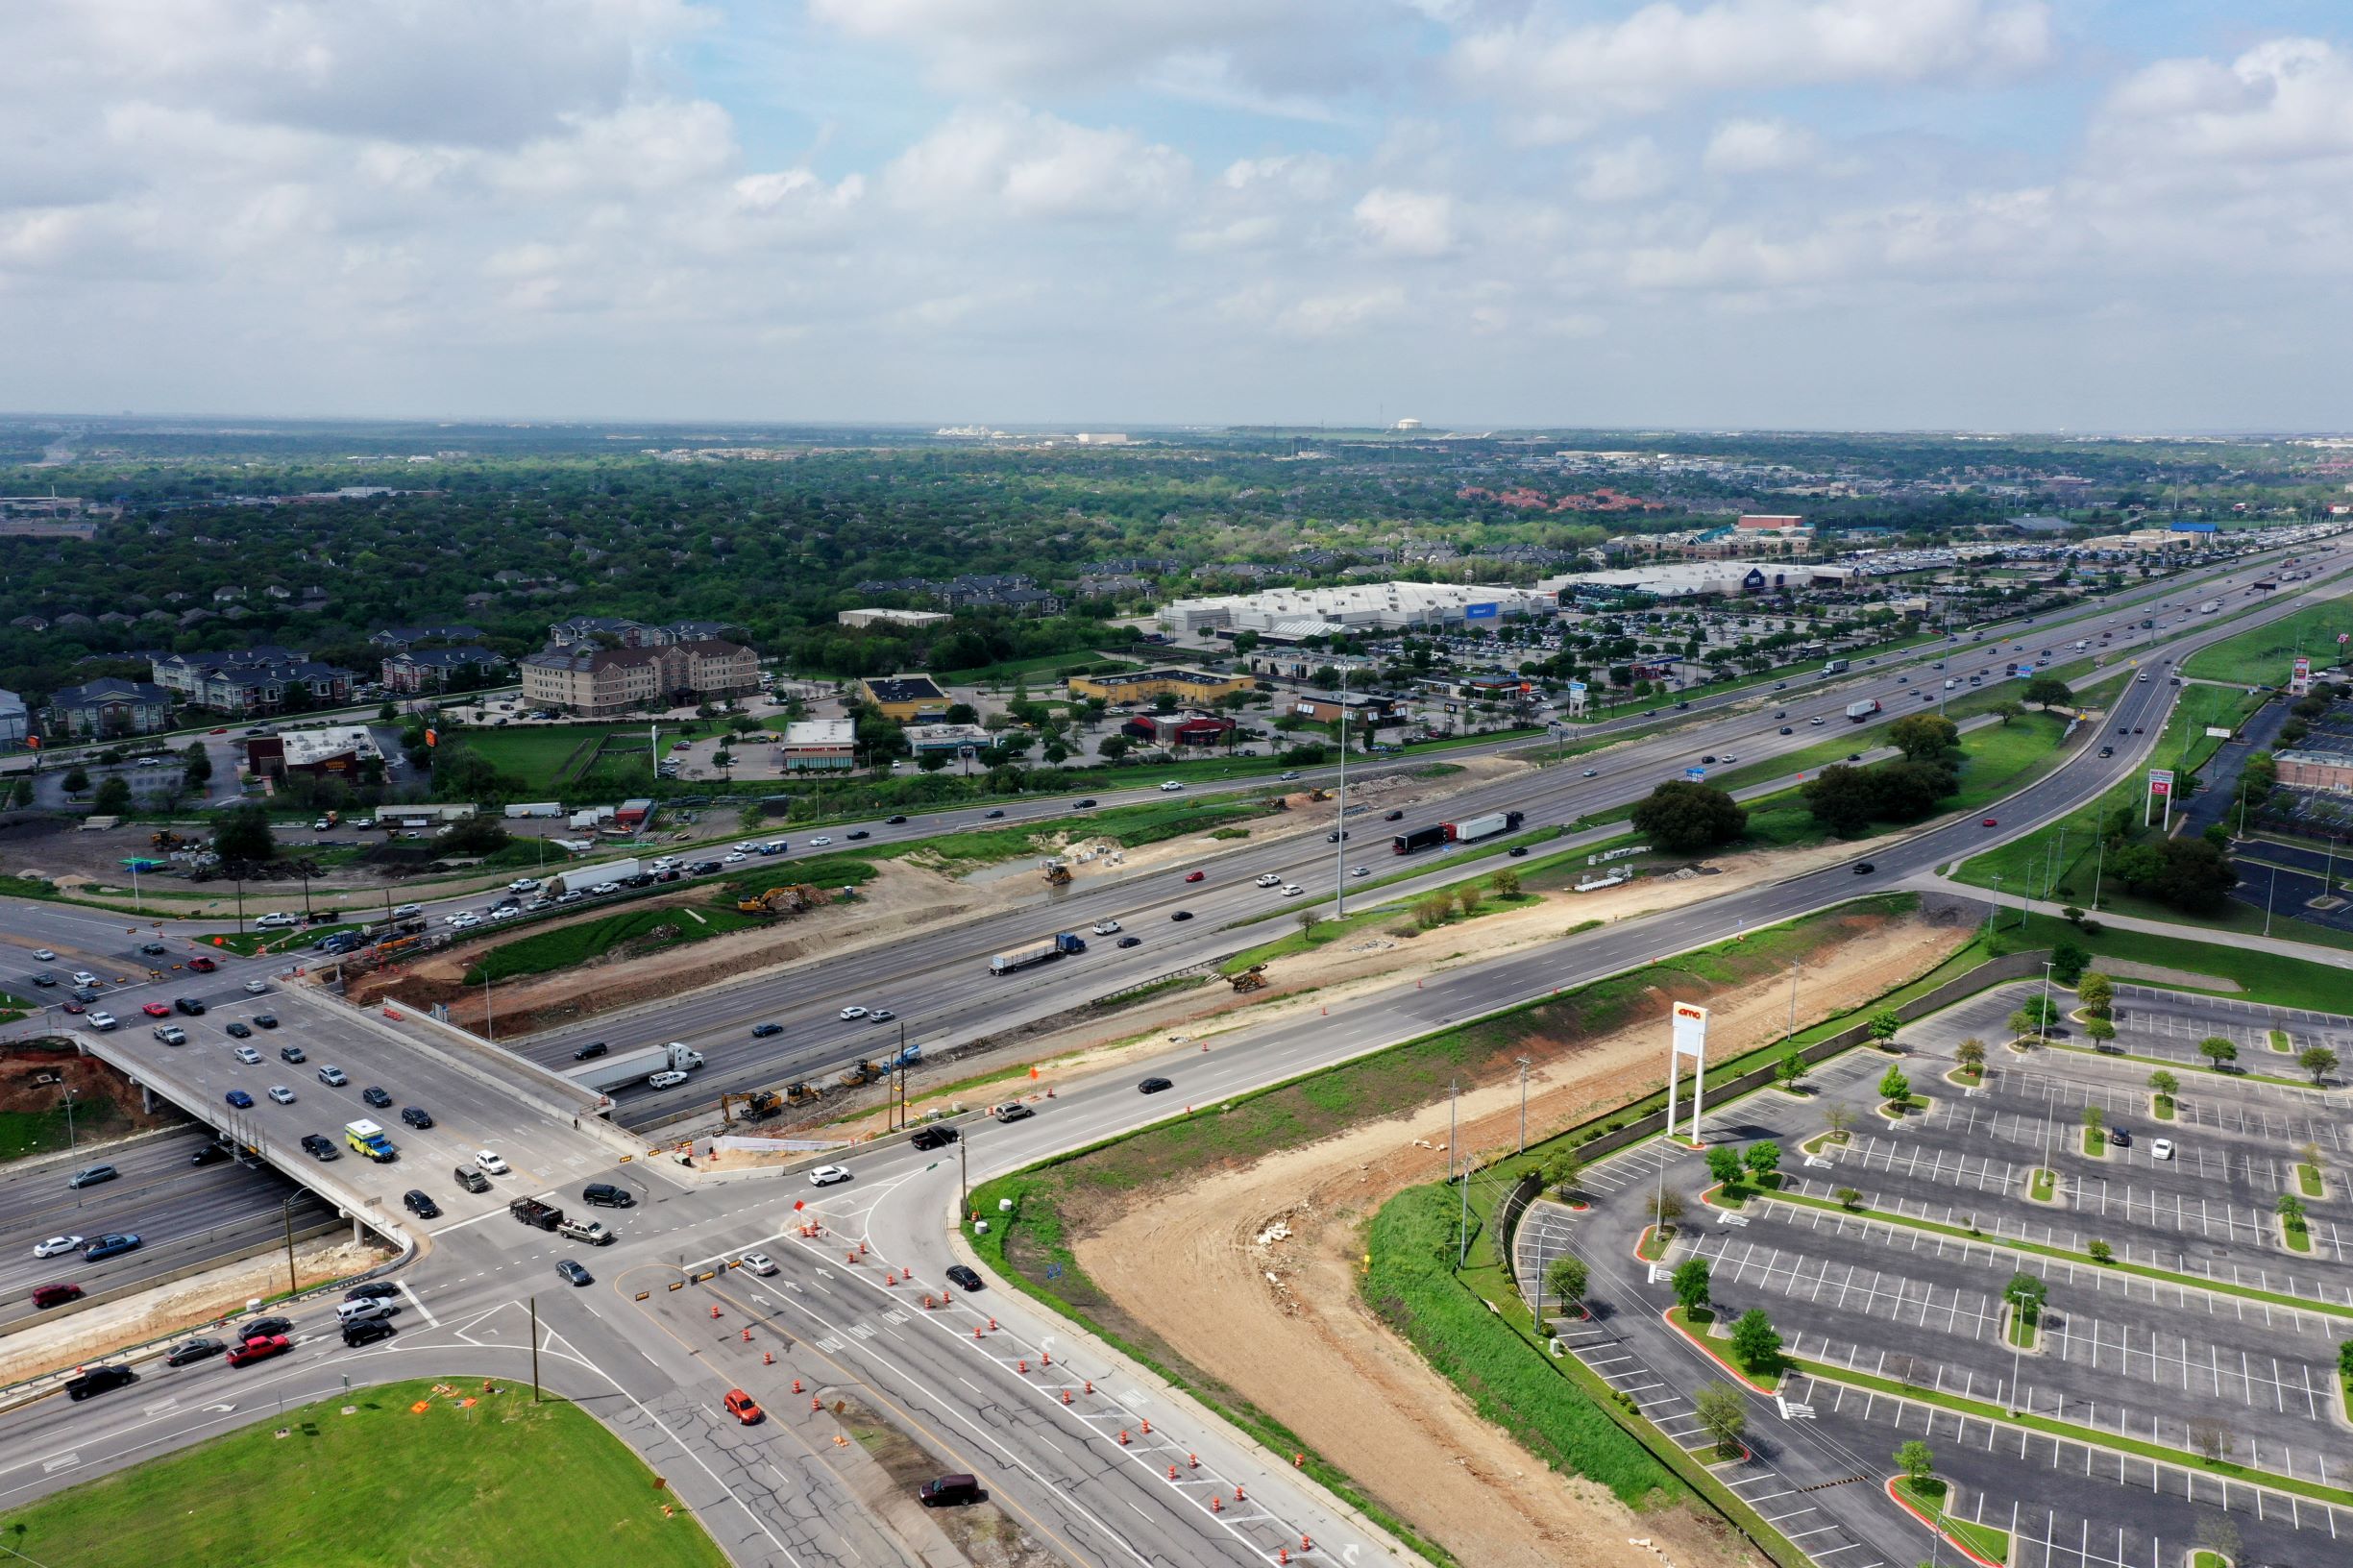 I-35 at Parmer Lane intersection bypass lane progress - March 2020